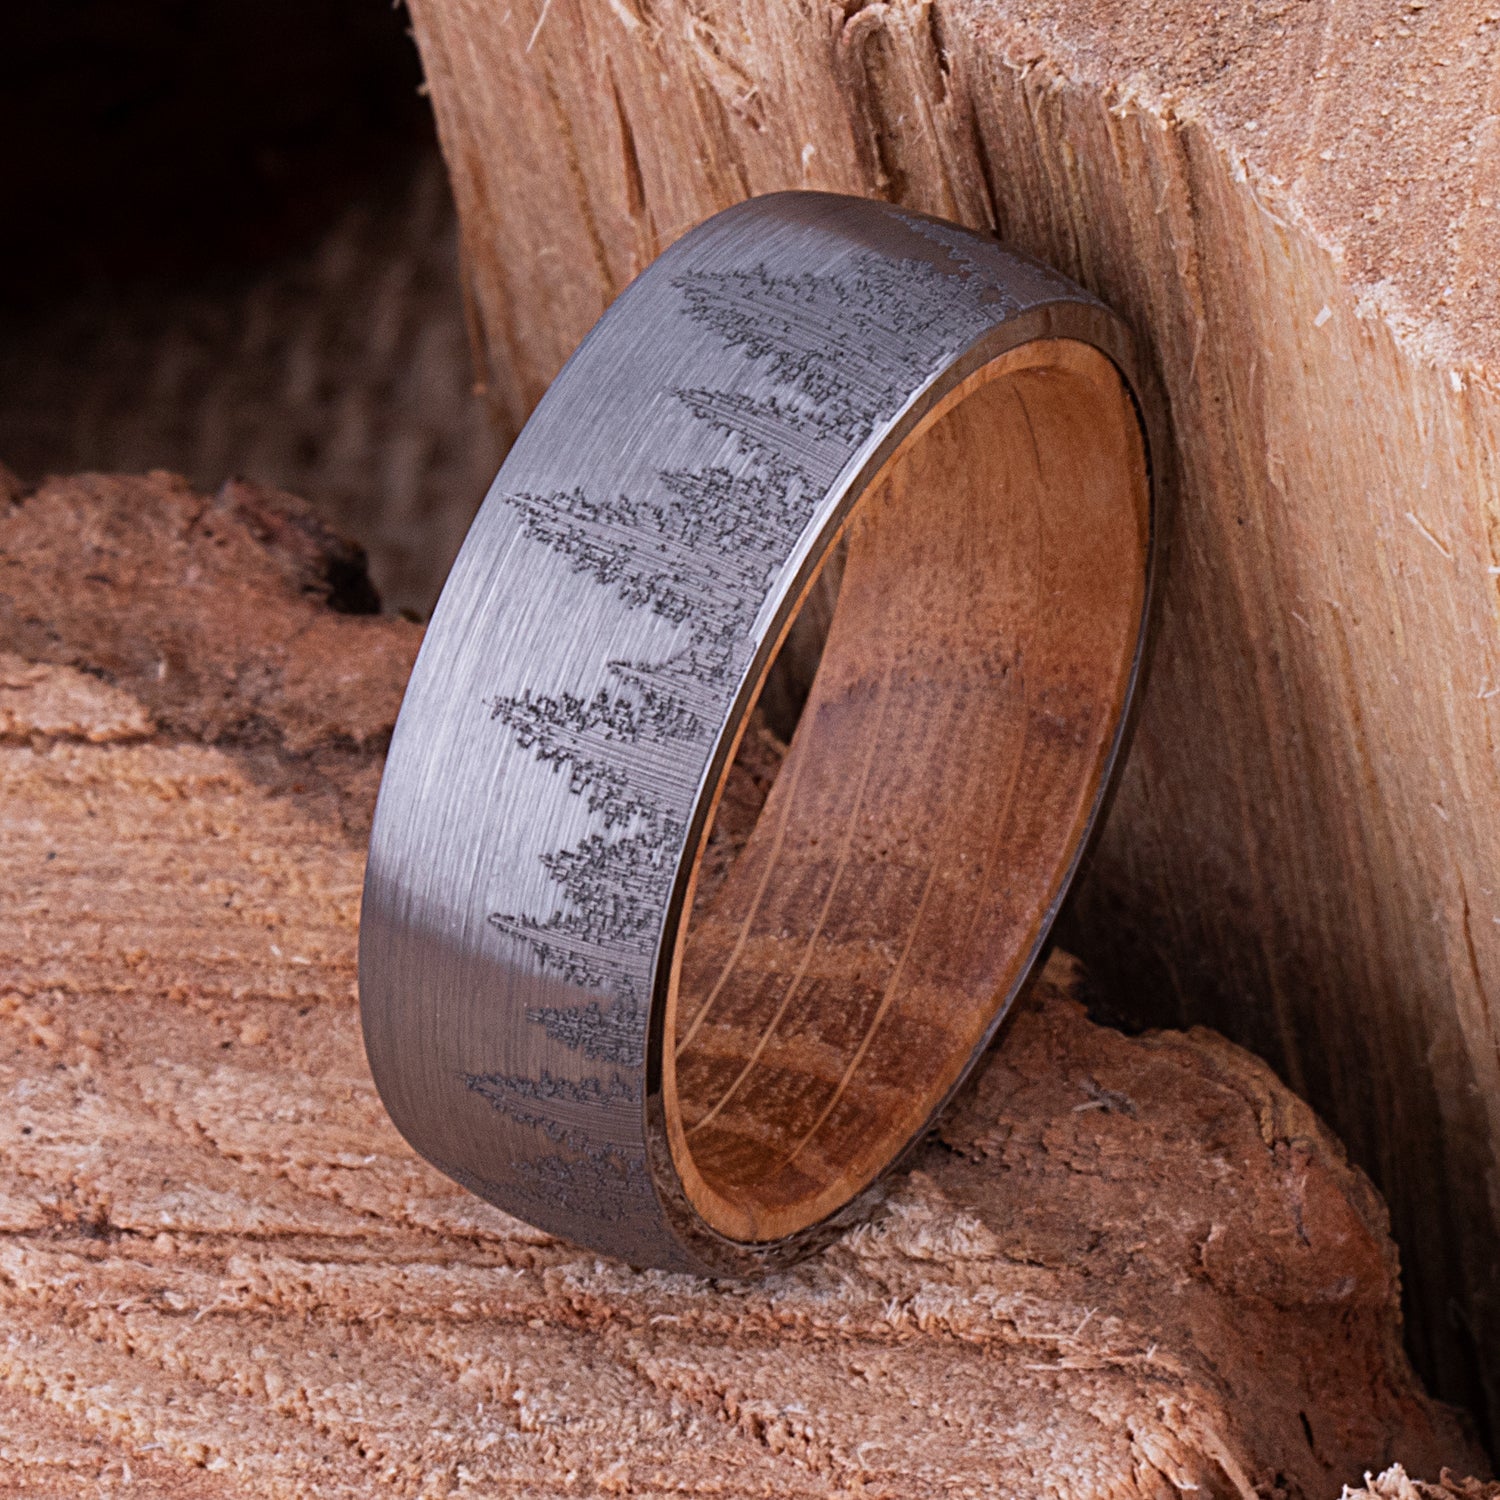 Tungsten Ring with Whisky Barrel 8mm - TCR149 wood men’s wedding or engagement band or promise ring for boyfriend